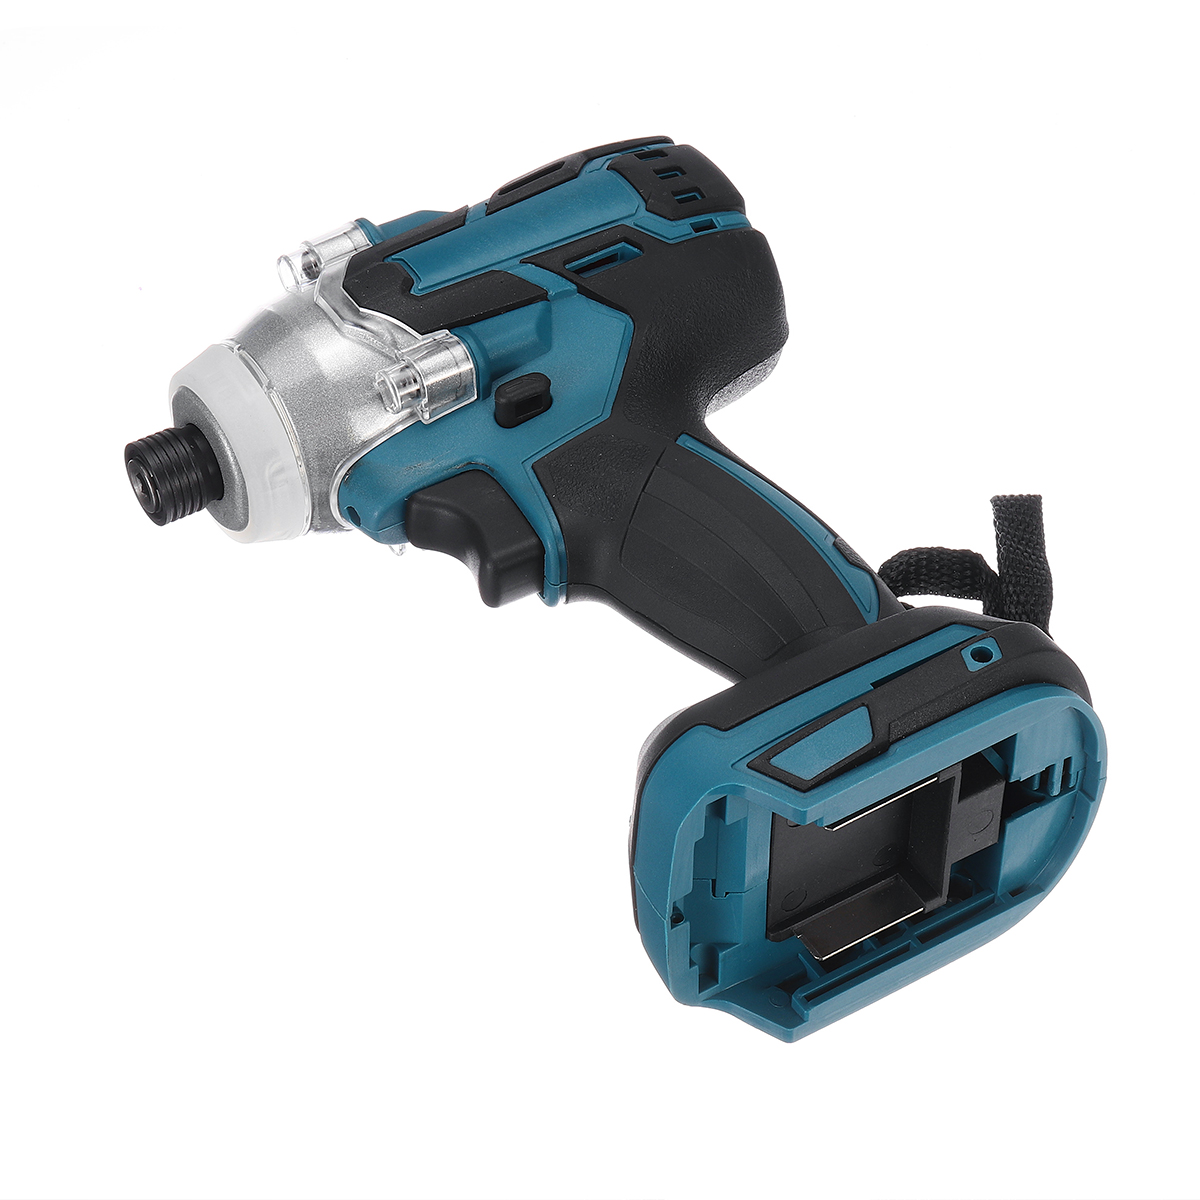 18V-520Nm-Cordless-Brushless-Impact-Electric-Screwdriver-Stepless-Speed-Rechargable-Driver-Adapted-T-1602644-6